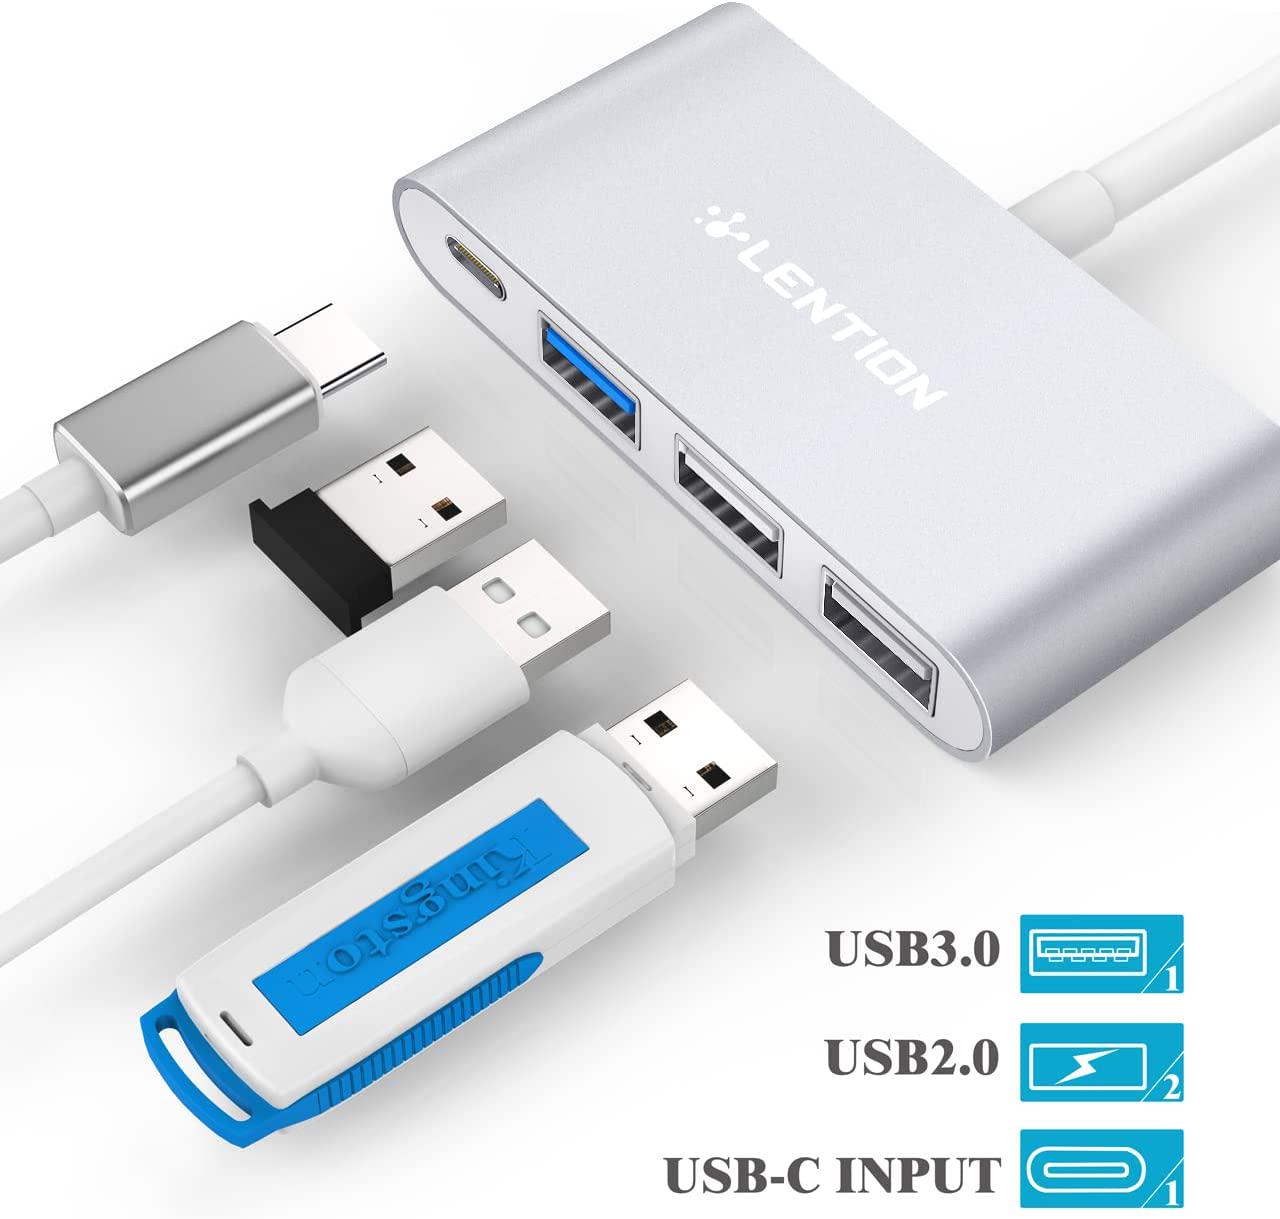 LENTION, LENTION 4-in-1 USB-C Hub with Type C, USB 3.0, USB 2.0 Compatible 2022-2016 MacBook Pro 13/15/16, New Mac Air/Surface, ChromeBook, More, Multiport Charging and Connecting Adapter (CB-C13, Silver)